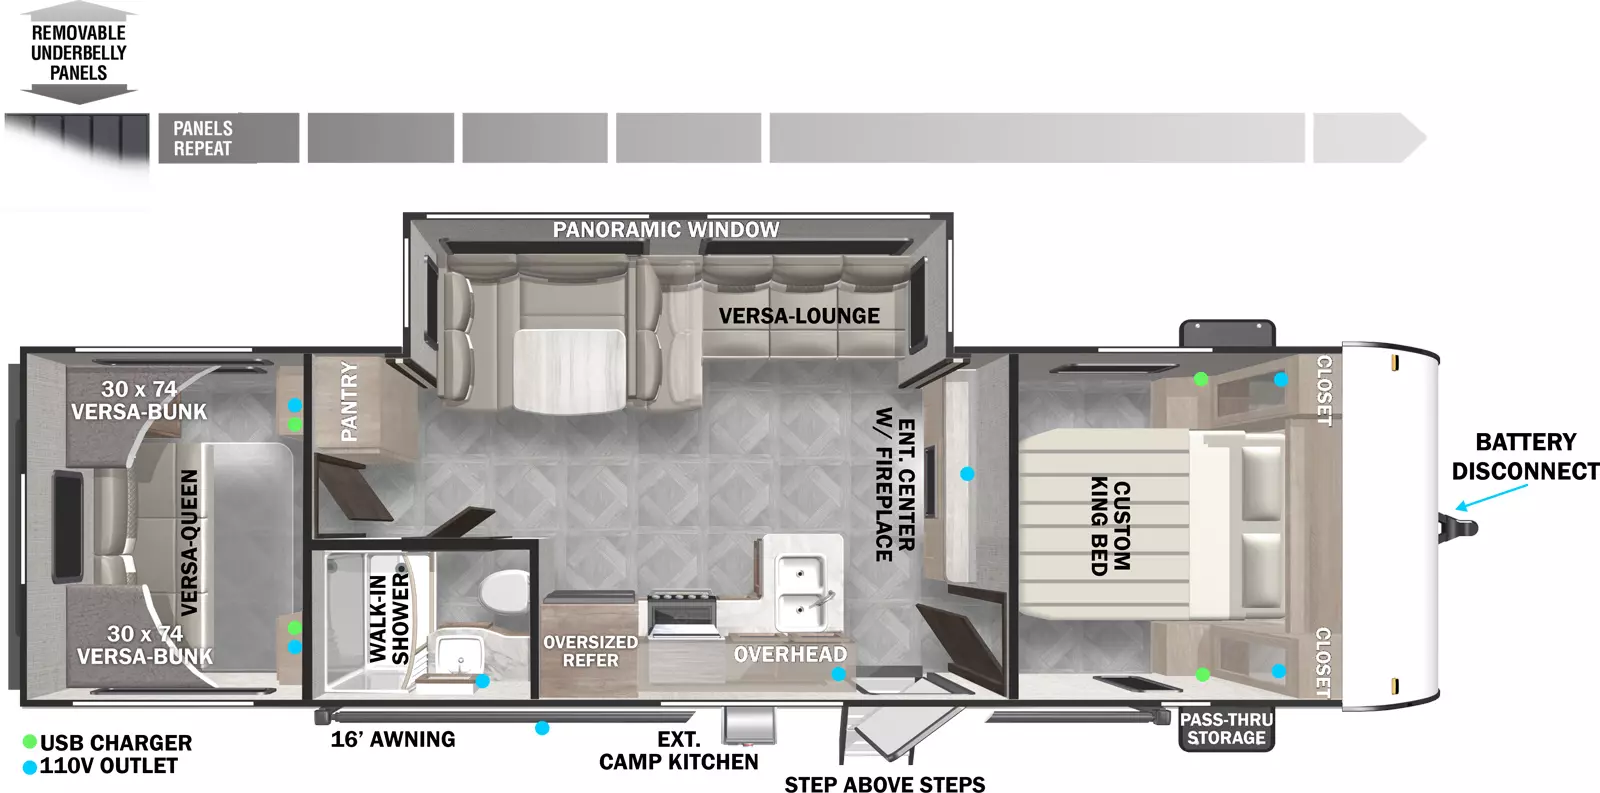 The 28VBXL has one entry and one slideout. Exterior features removeable underbelly panels, battery disconnect, StepAbove entry steps, exterior camp kitchen, front pass through storage, and 16 foot awning. Interior layout front to back: custom king bed with closets on each side; entertainment center with fireplace along inner wall; off-door side slideout with versa-lounge dinette, and panoramic window; entry door, peninsula kitchen counter with sink wraps to door side with overhead cabinet, cooktop, and oversized refrigerator; off-door side pantry; door side side-aisle full bathroom with walk-in shower; rear bunk house with versa queen below and opposing versa bunk beds above. USB chargers and 110V outlets throughout.